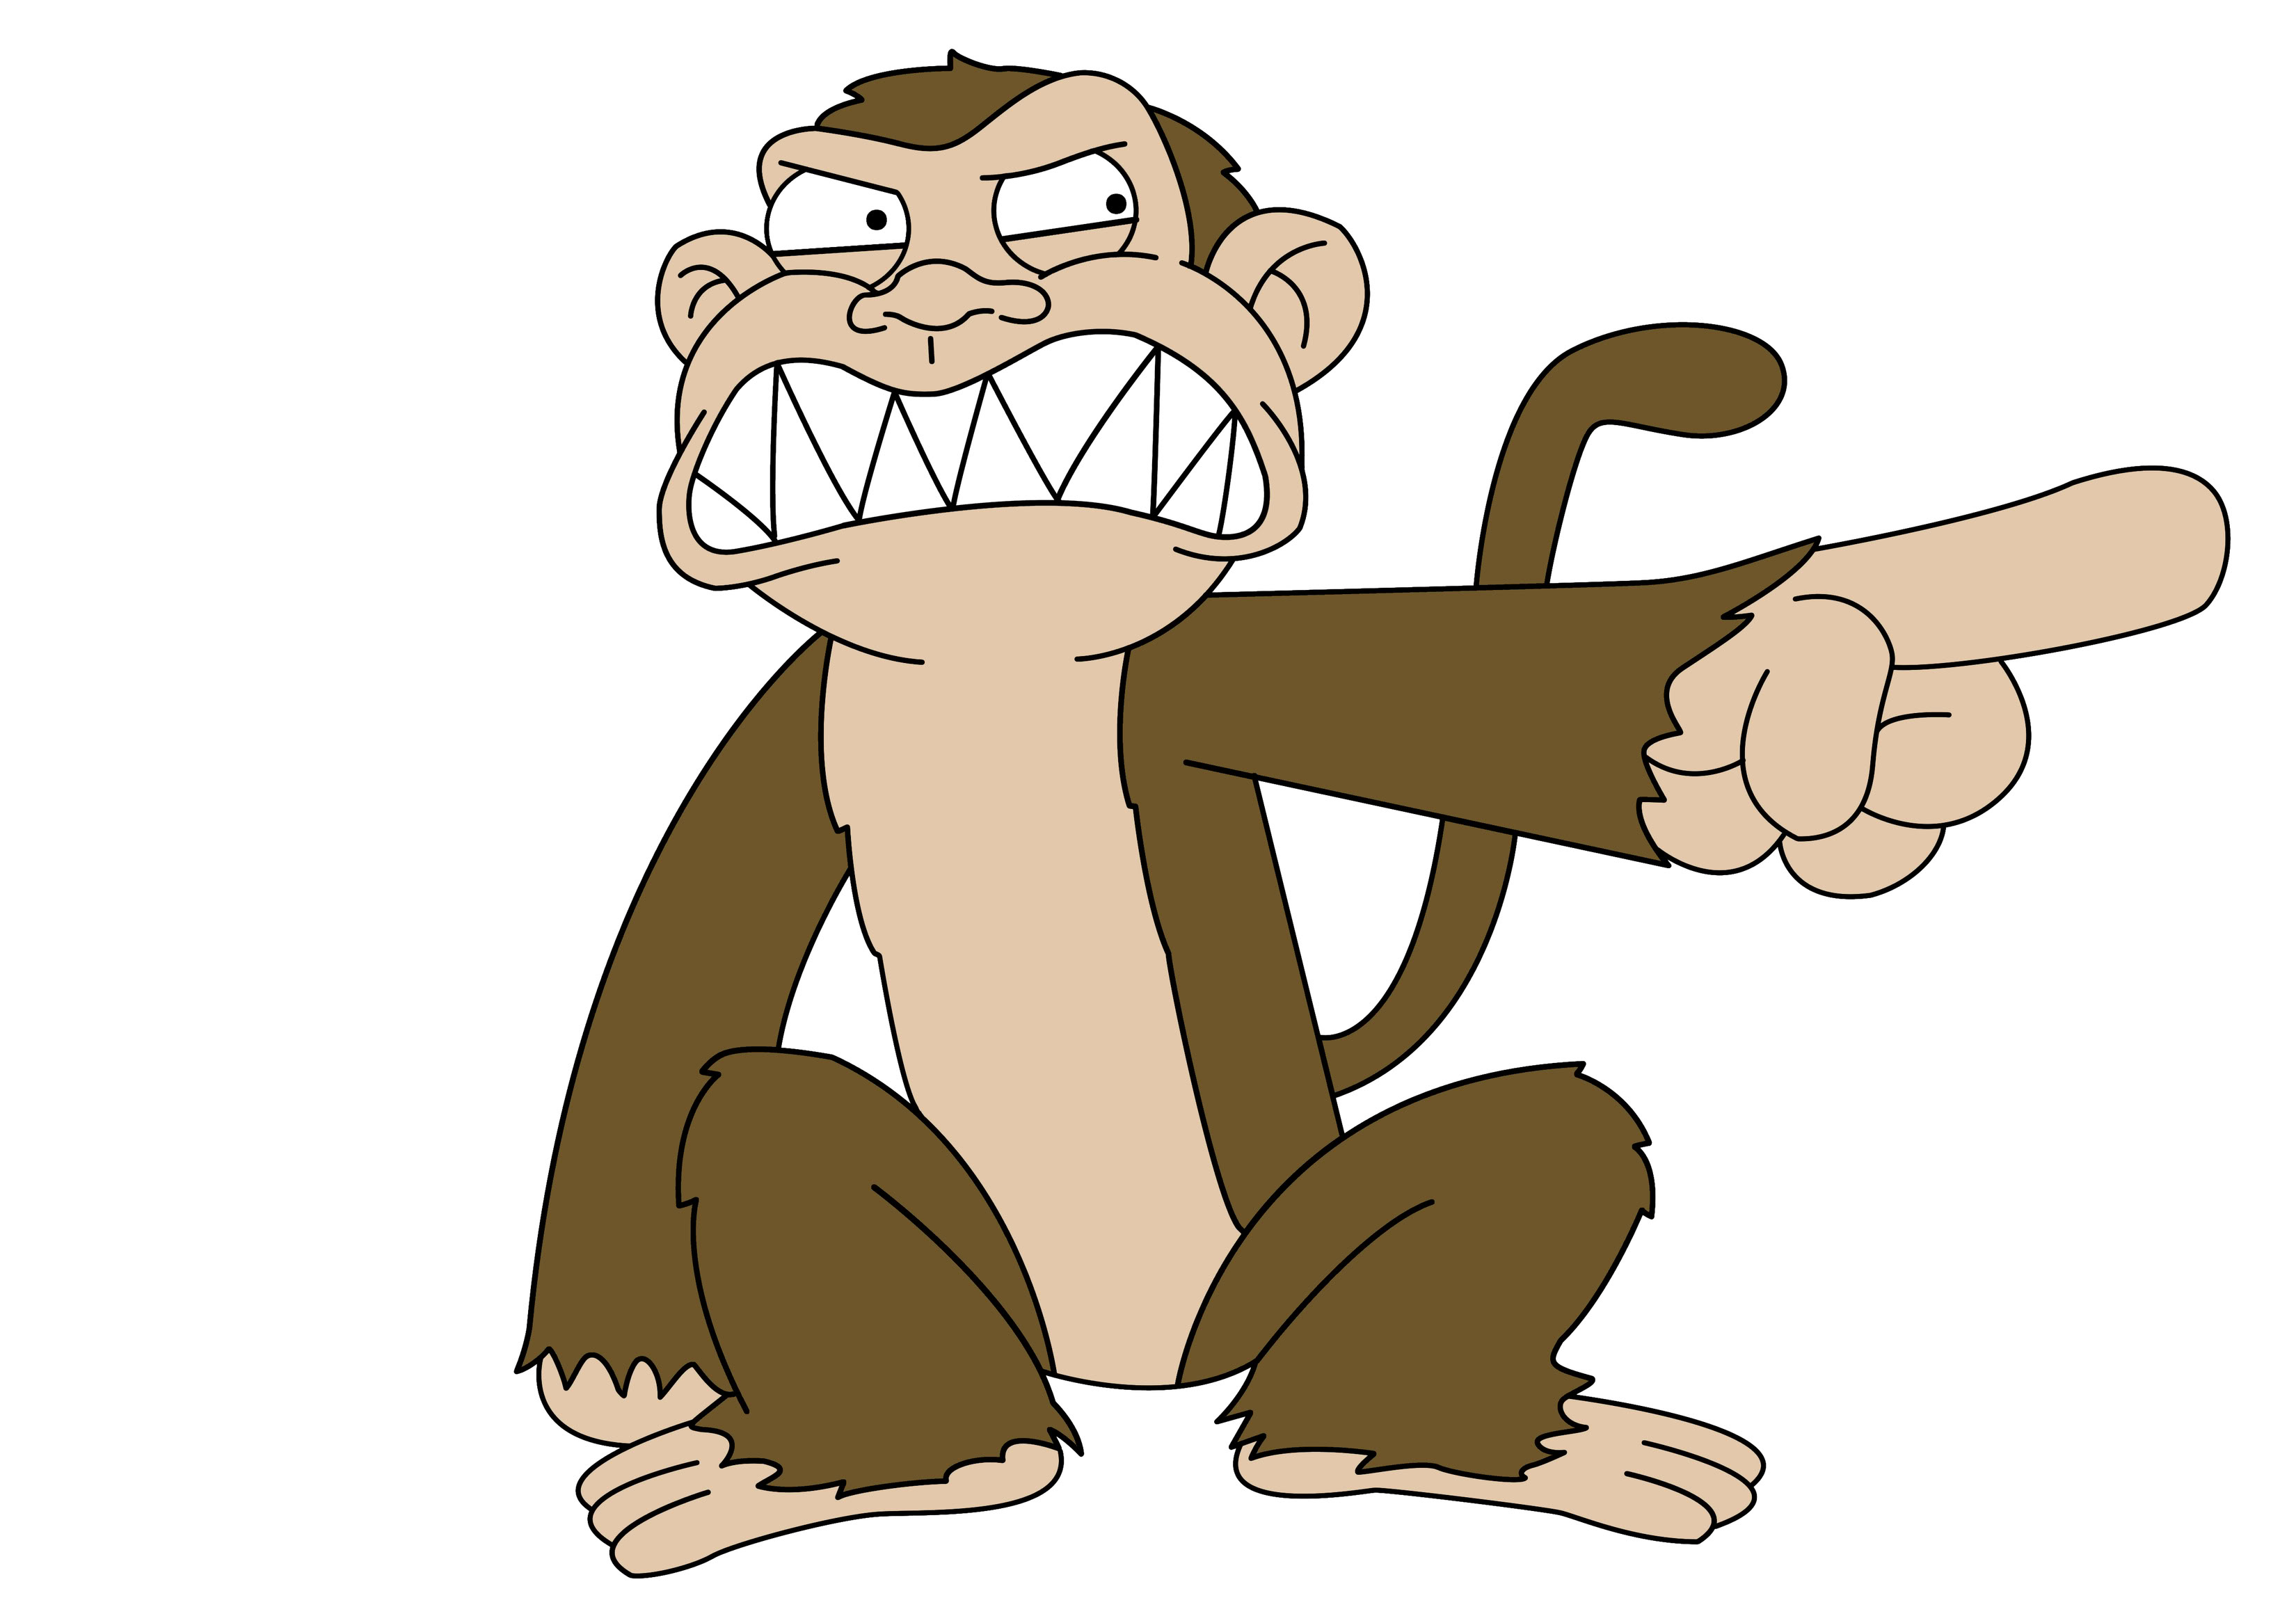 Angry Monkey Cartoon - ClipArt Best